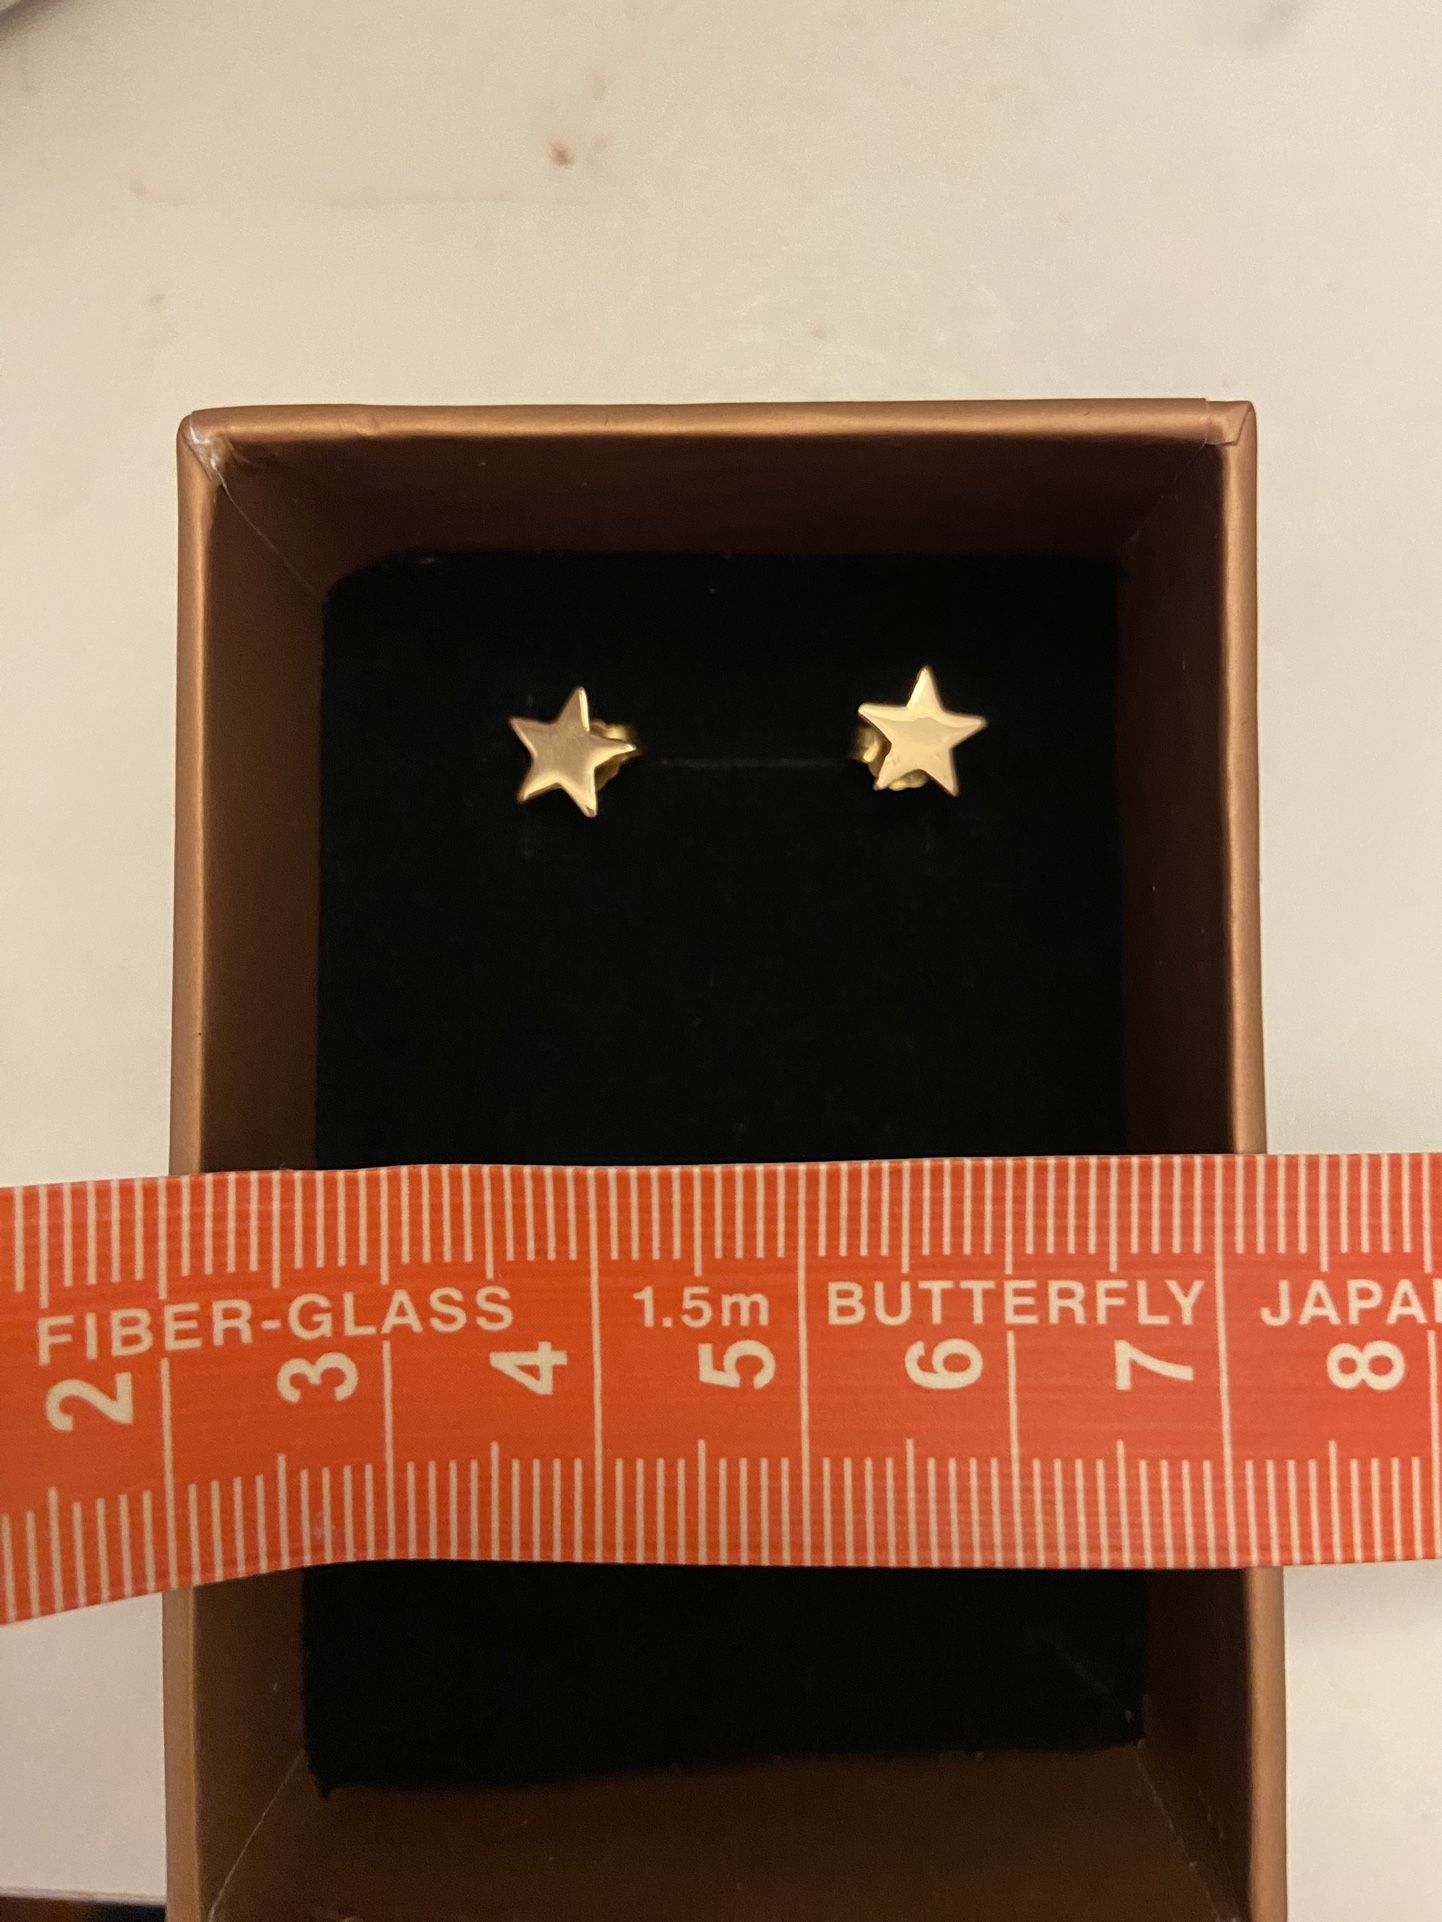 Fantastic star shape 18k gold material earrings jewelry New/never used Material: 18k gold Other 18k gold earrings and jewelry are also available. Mess